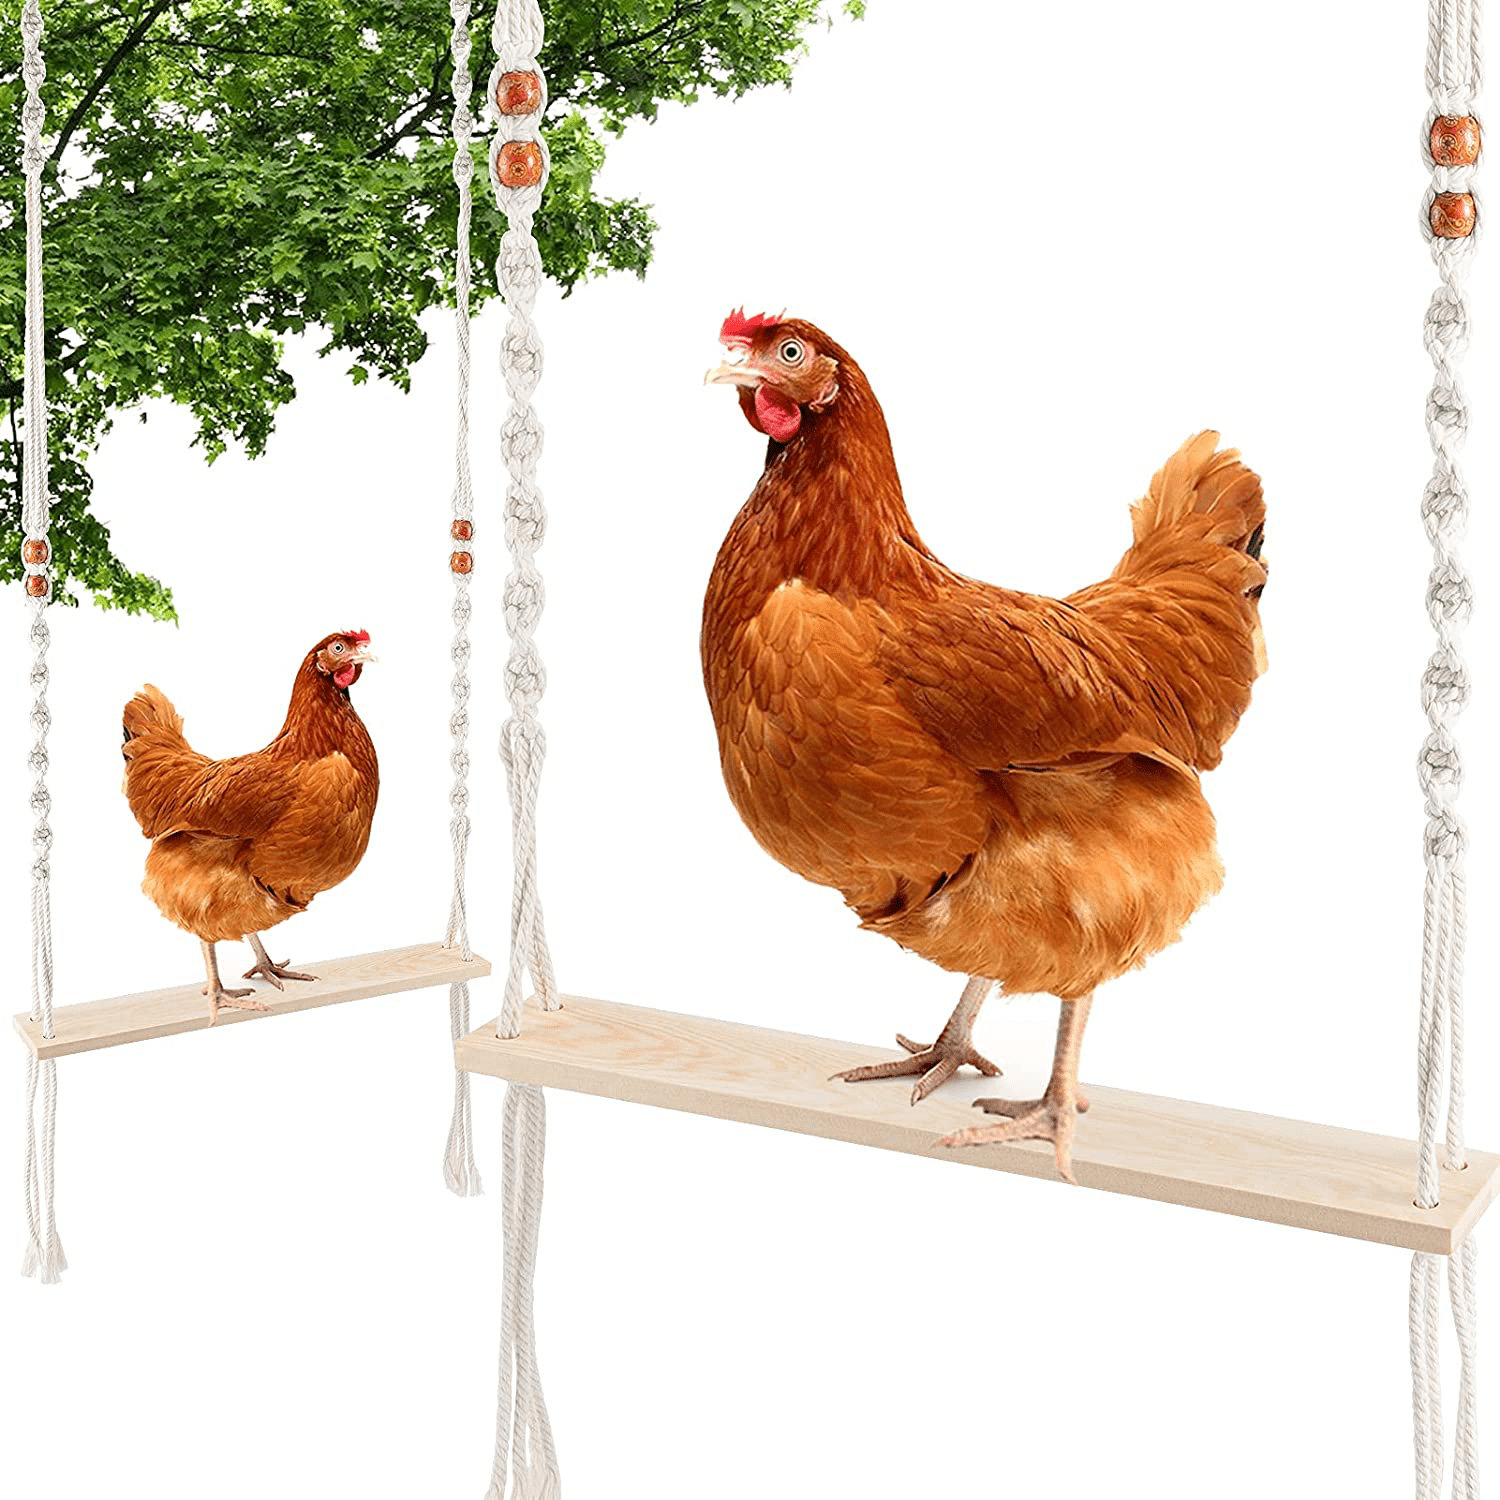 2 Pcs Chicken Swing Toy- Bohemian Natural Wood Chicken Stand Perch Hand-Woven Chicken Ladder with Beads Bird Swing Toy for Big Poultry Chicken Duck Bird Parrot Pet Entertainment